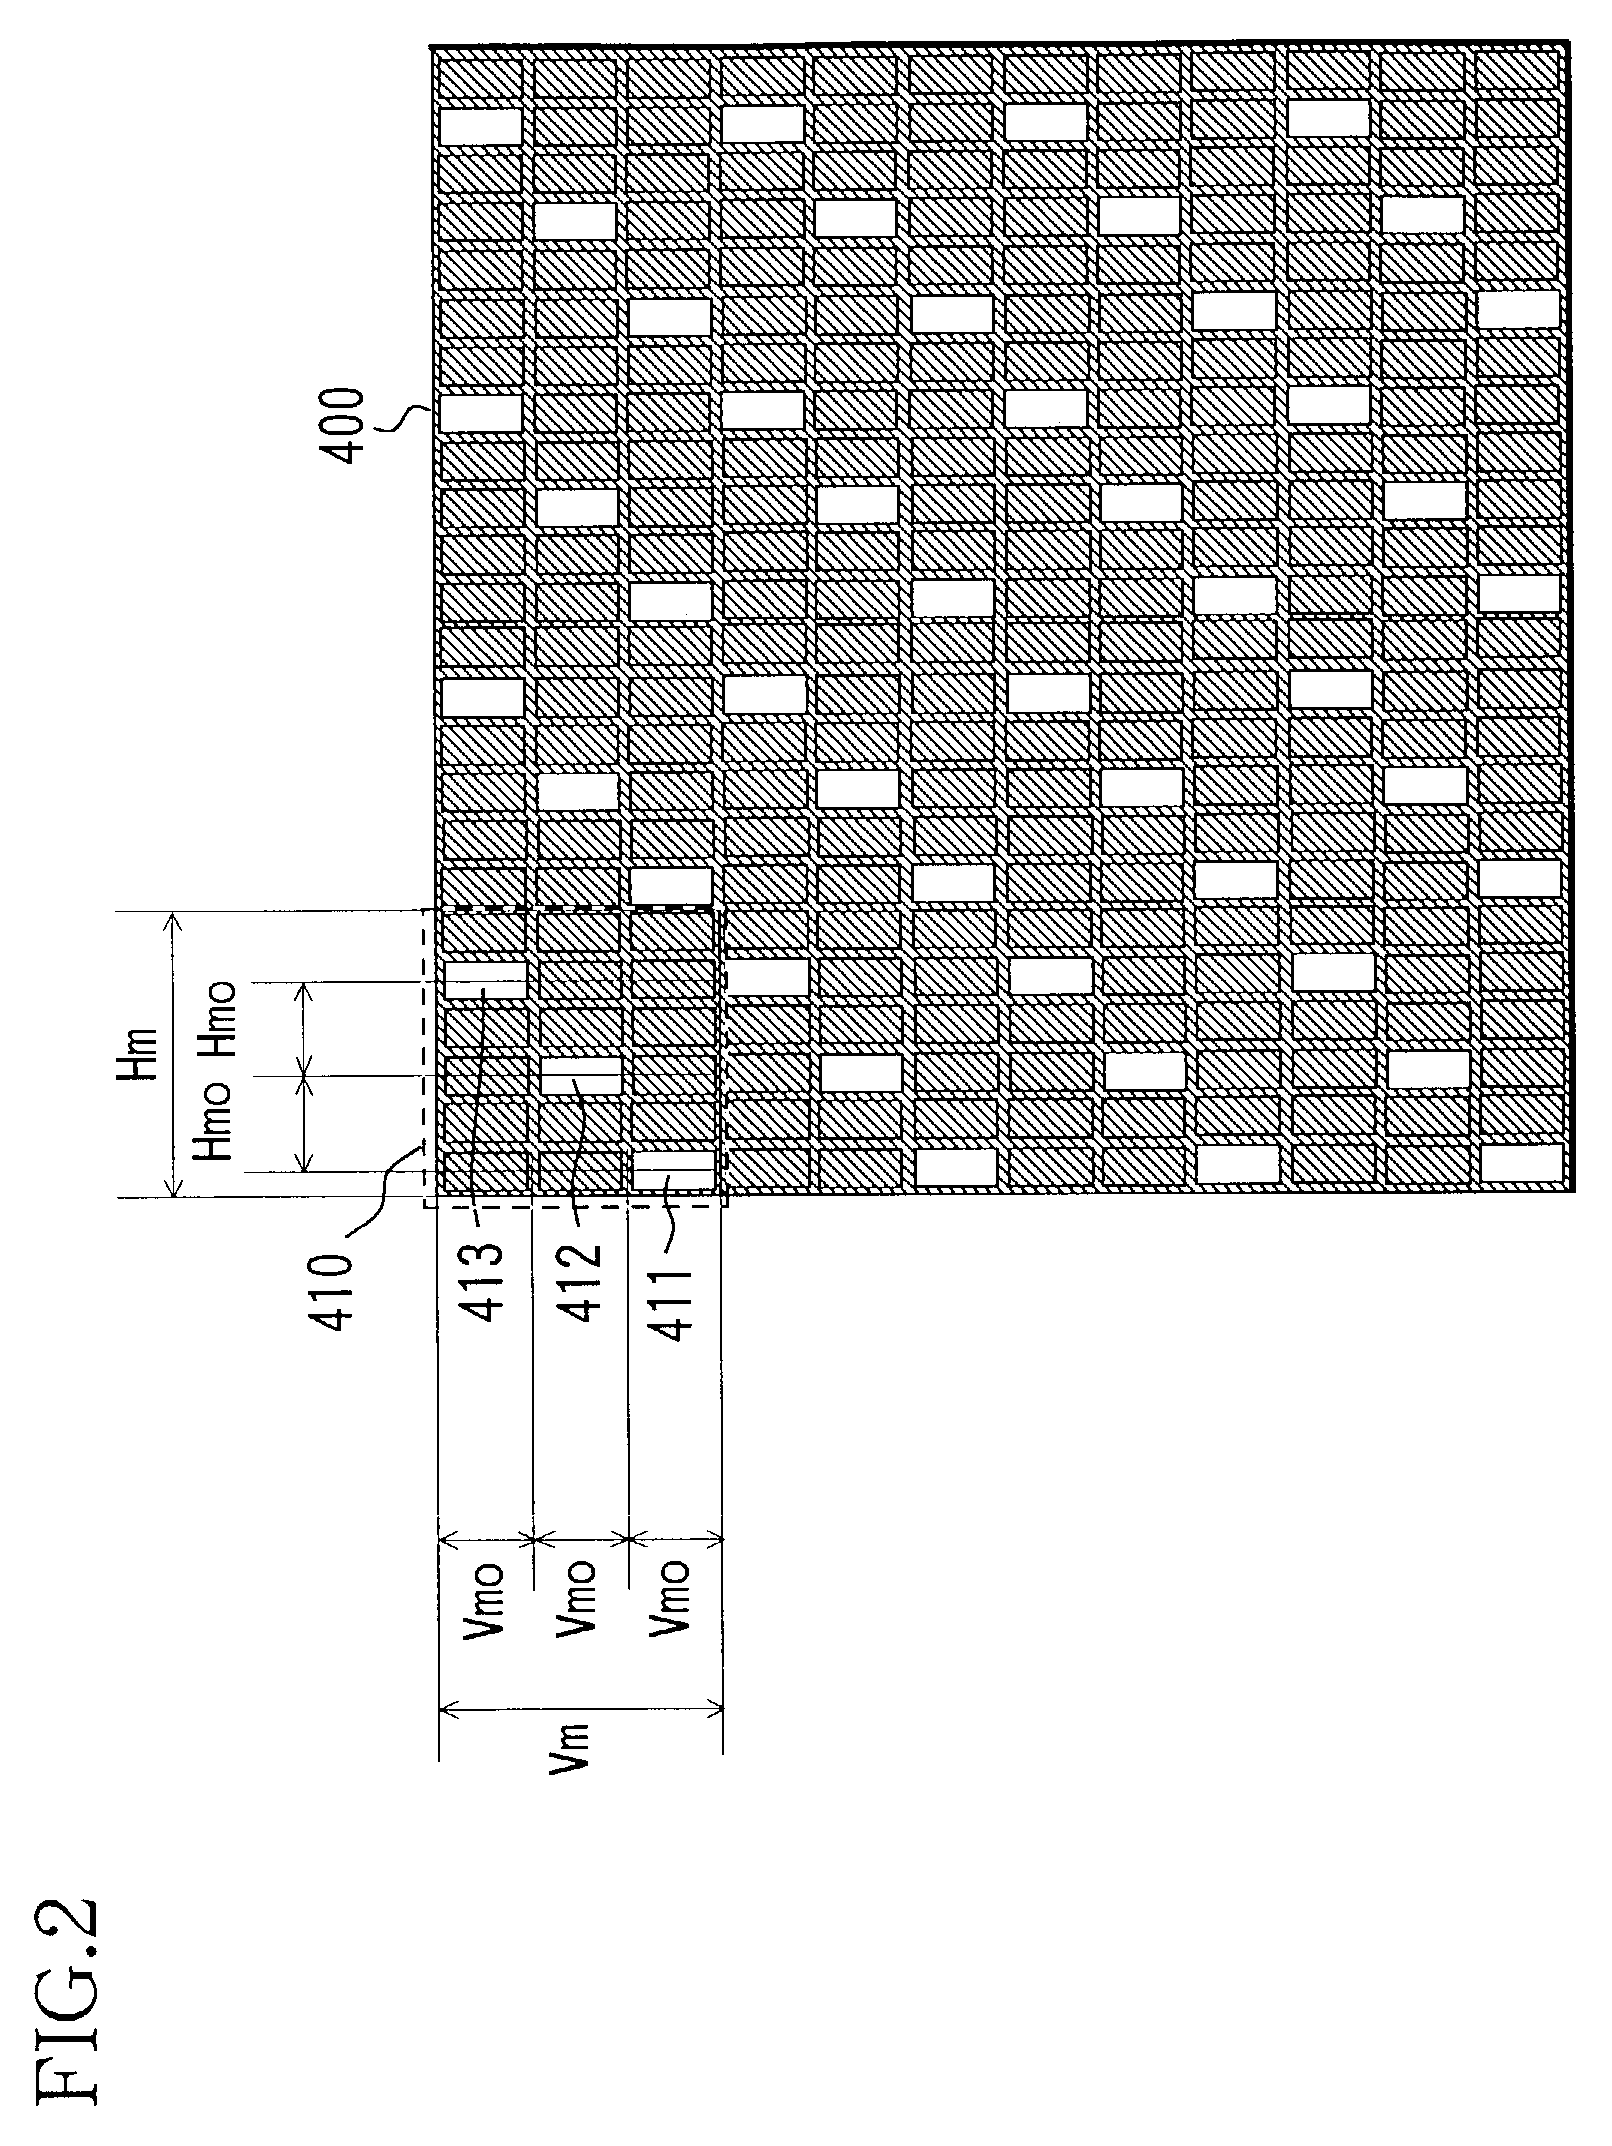 Stereoscopic image display apparatus and stereoscopic image display system